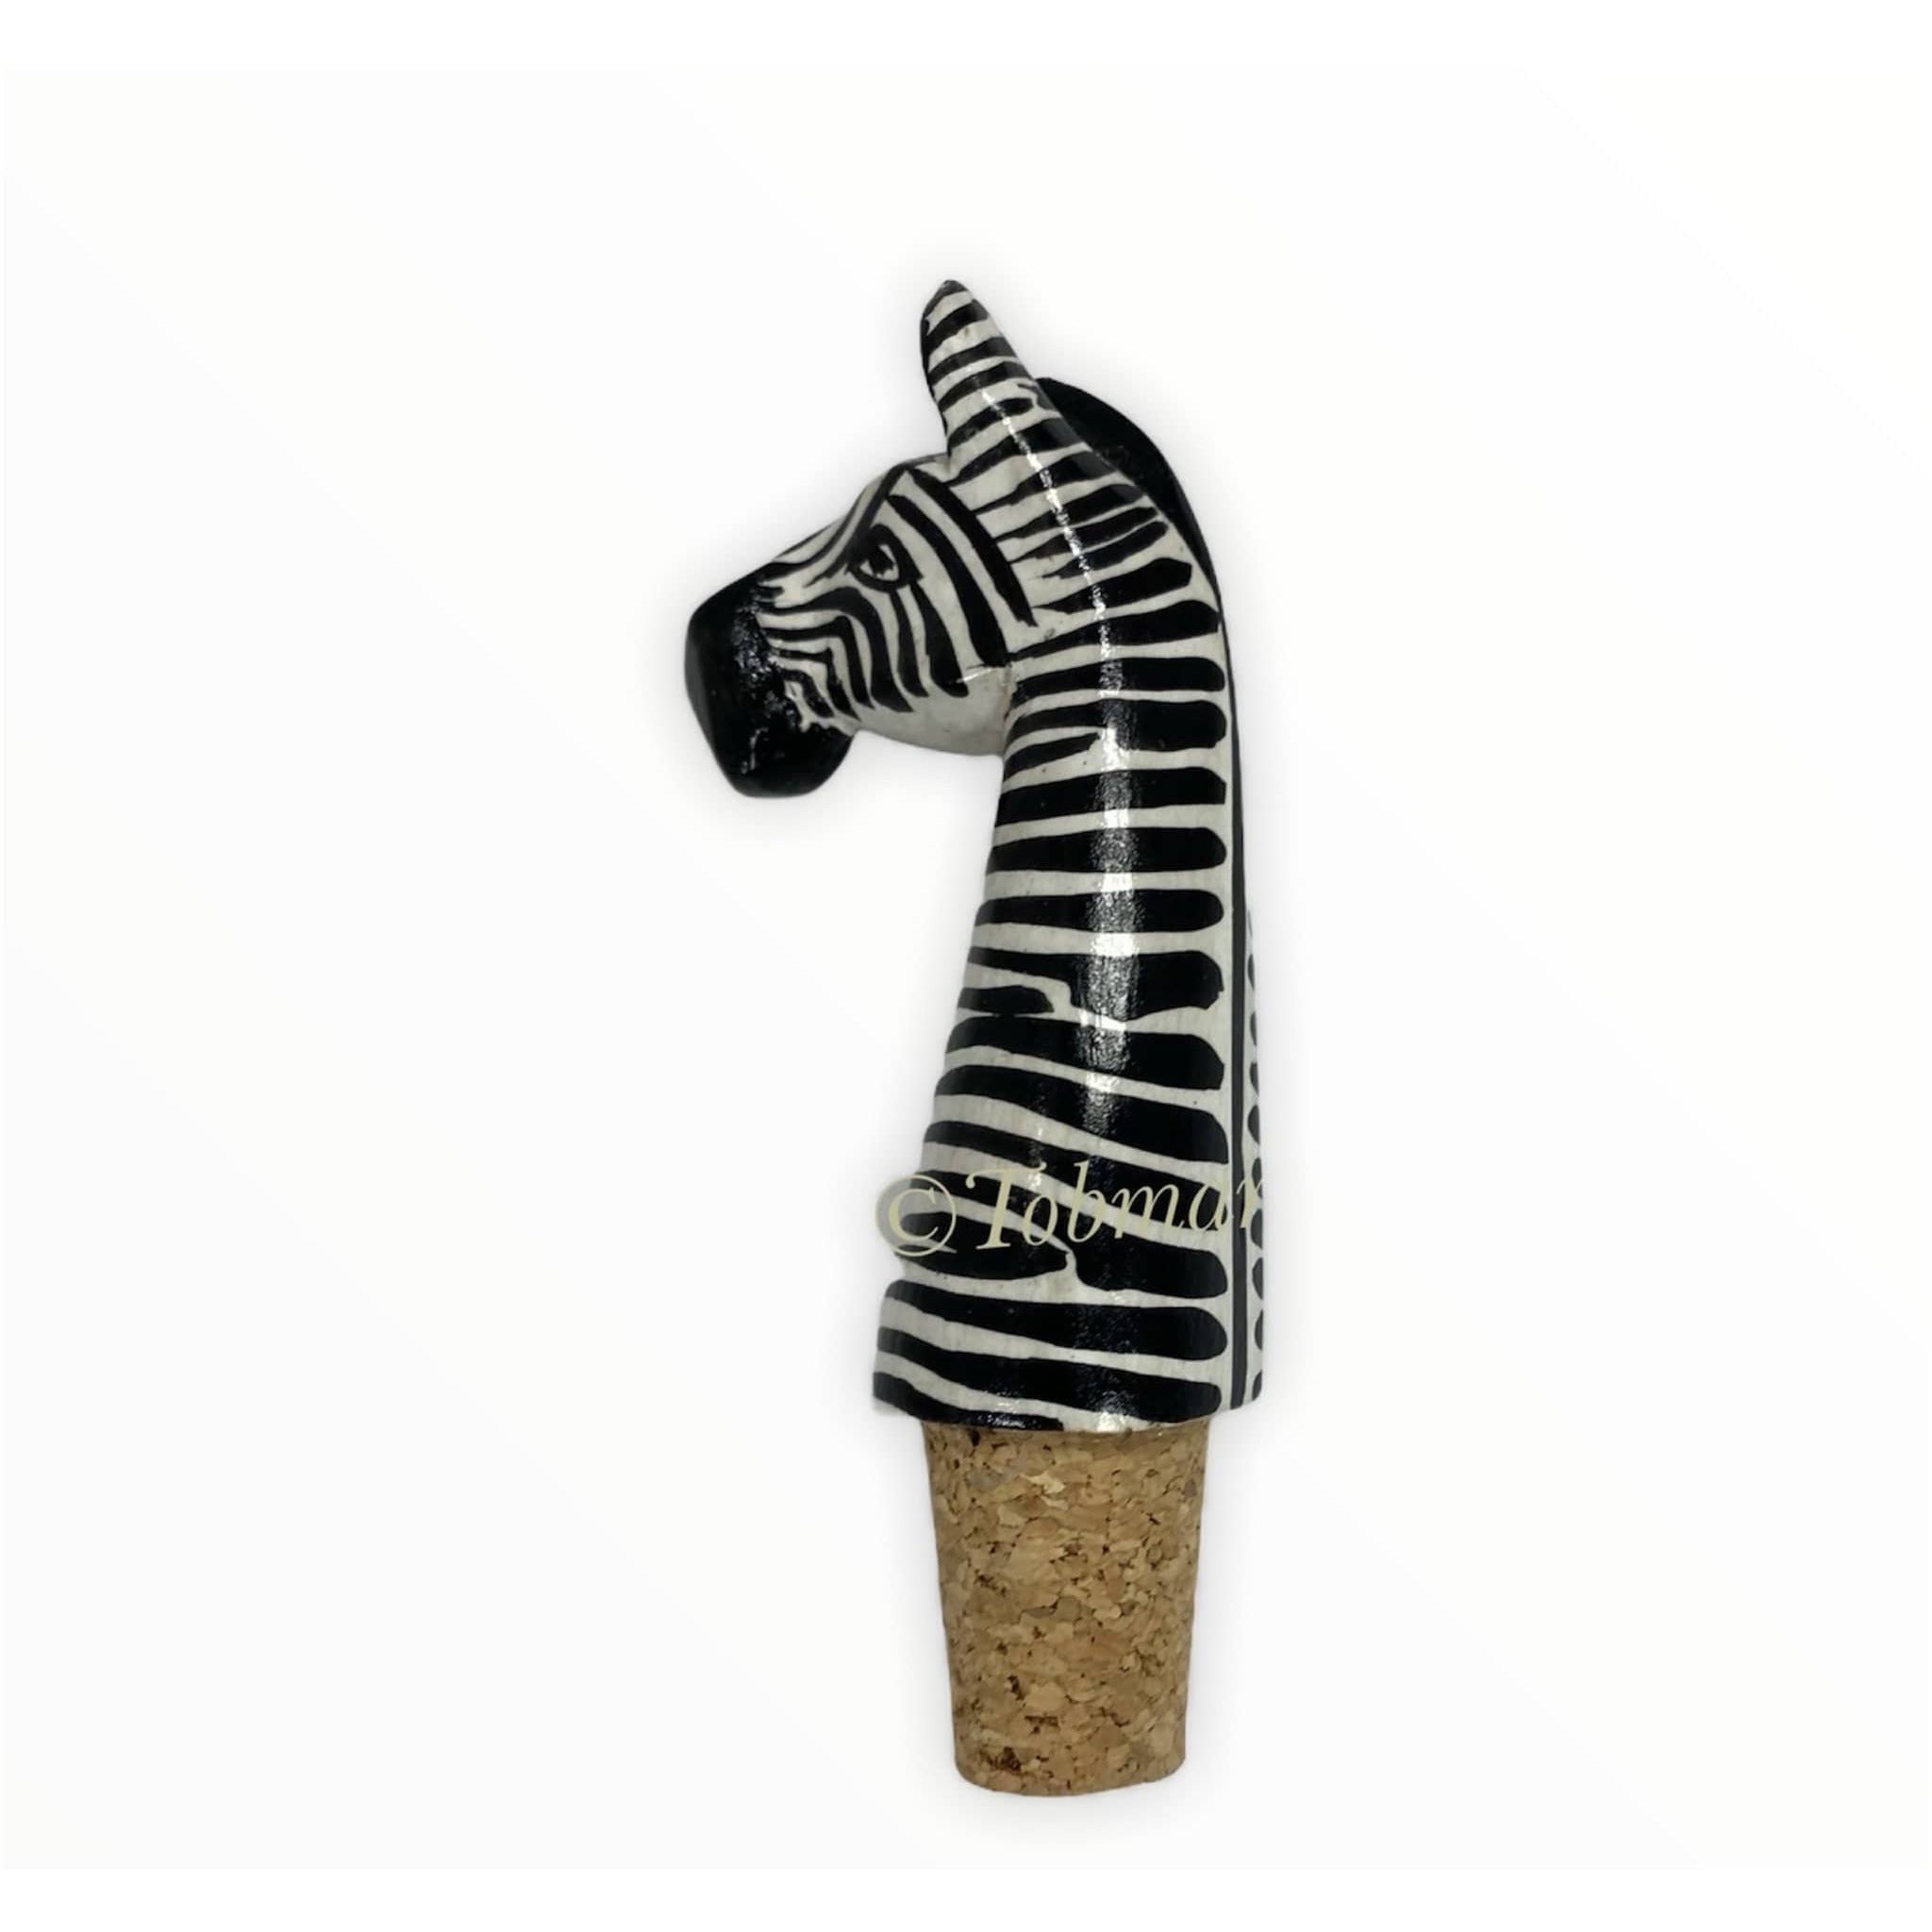 Tobmarc Home Decor & Gifts  Zebra Wine Bottle stoppers with Animal Designs, Decorative Wooden Beverage Stopper